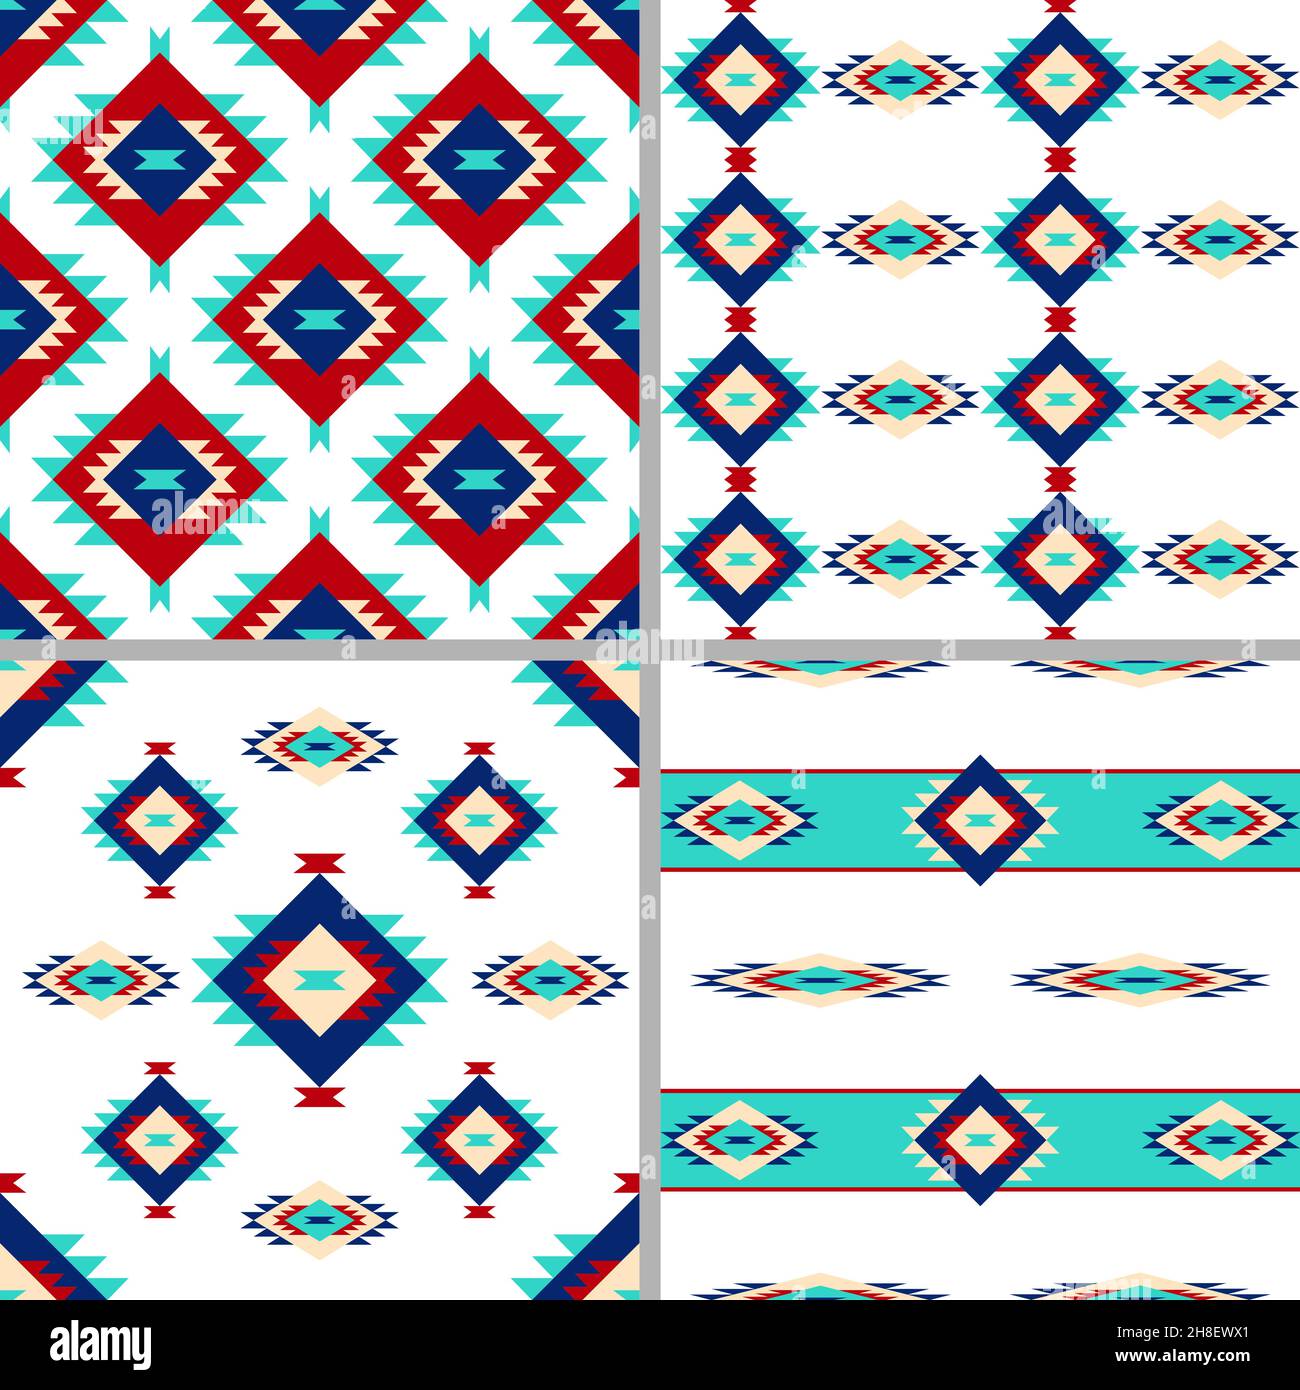 Vector illustration collection of Santa Fe style geometric seamless pattern Stock Vector